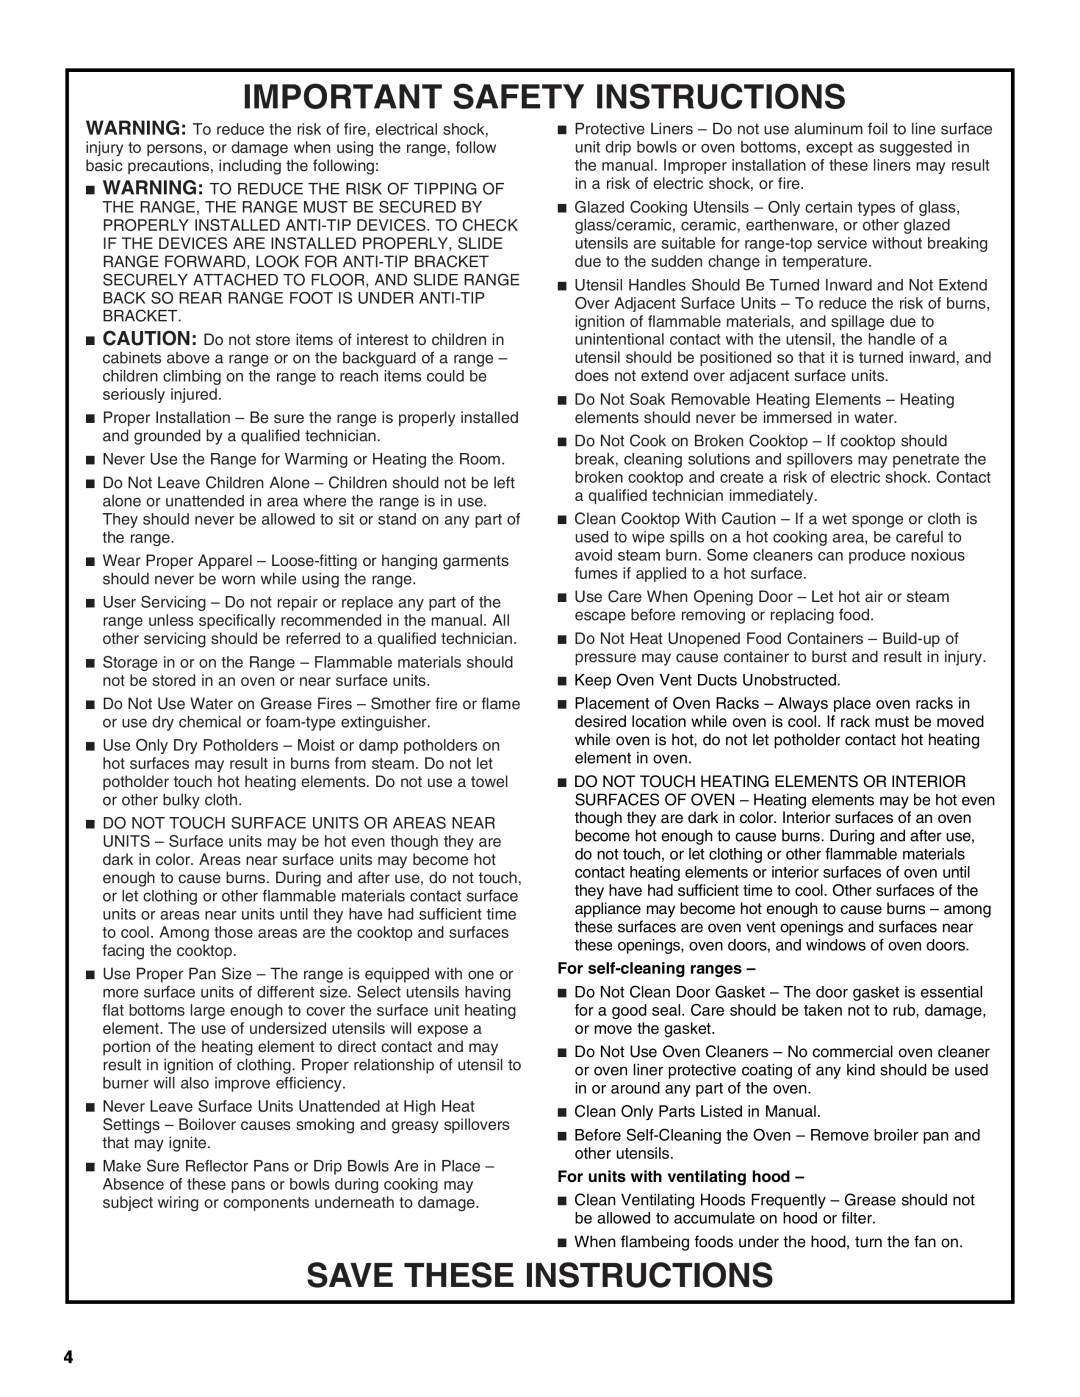 Whirlpool RF3020XKQ5, W10017640 manual Important Safety Instructions, Save These Instructions, For self-cleaningranges 